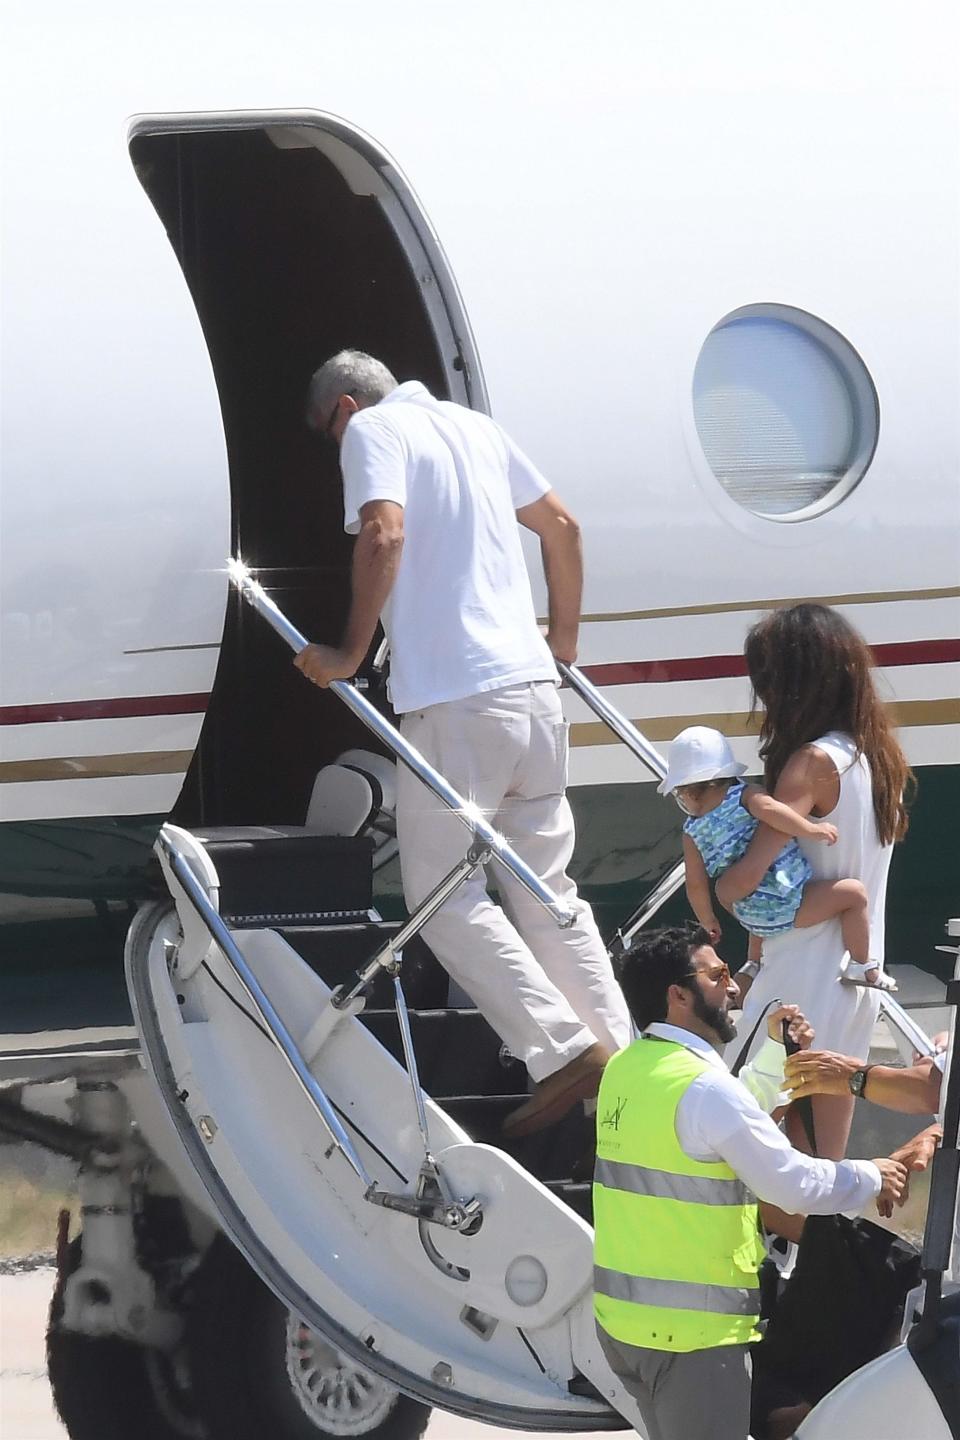 George Clooney boarding a plane to leave Sardinia on July 12 following his motorbike crash. His elbow appeared to have bruises and cuts on it, though it’s unclear if they were related to the crash. (Photo: Backgrid)